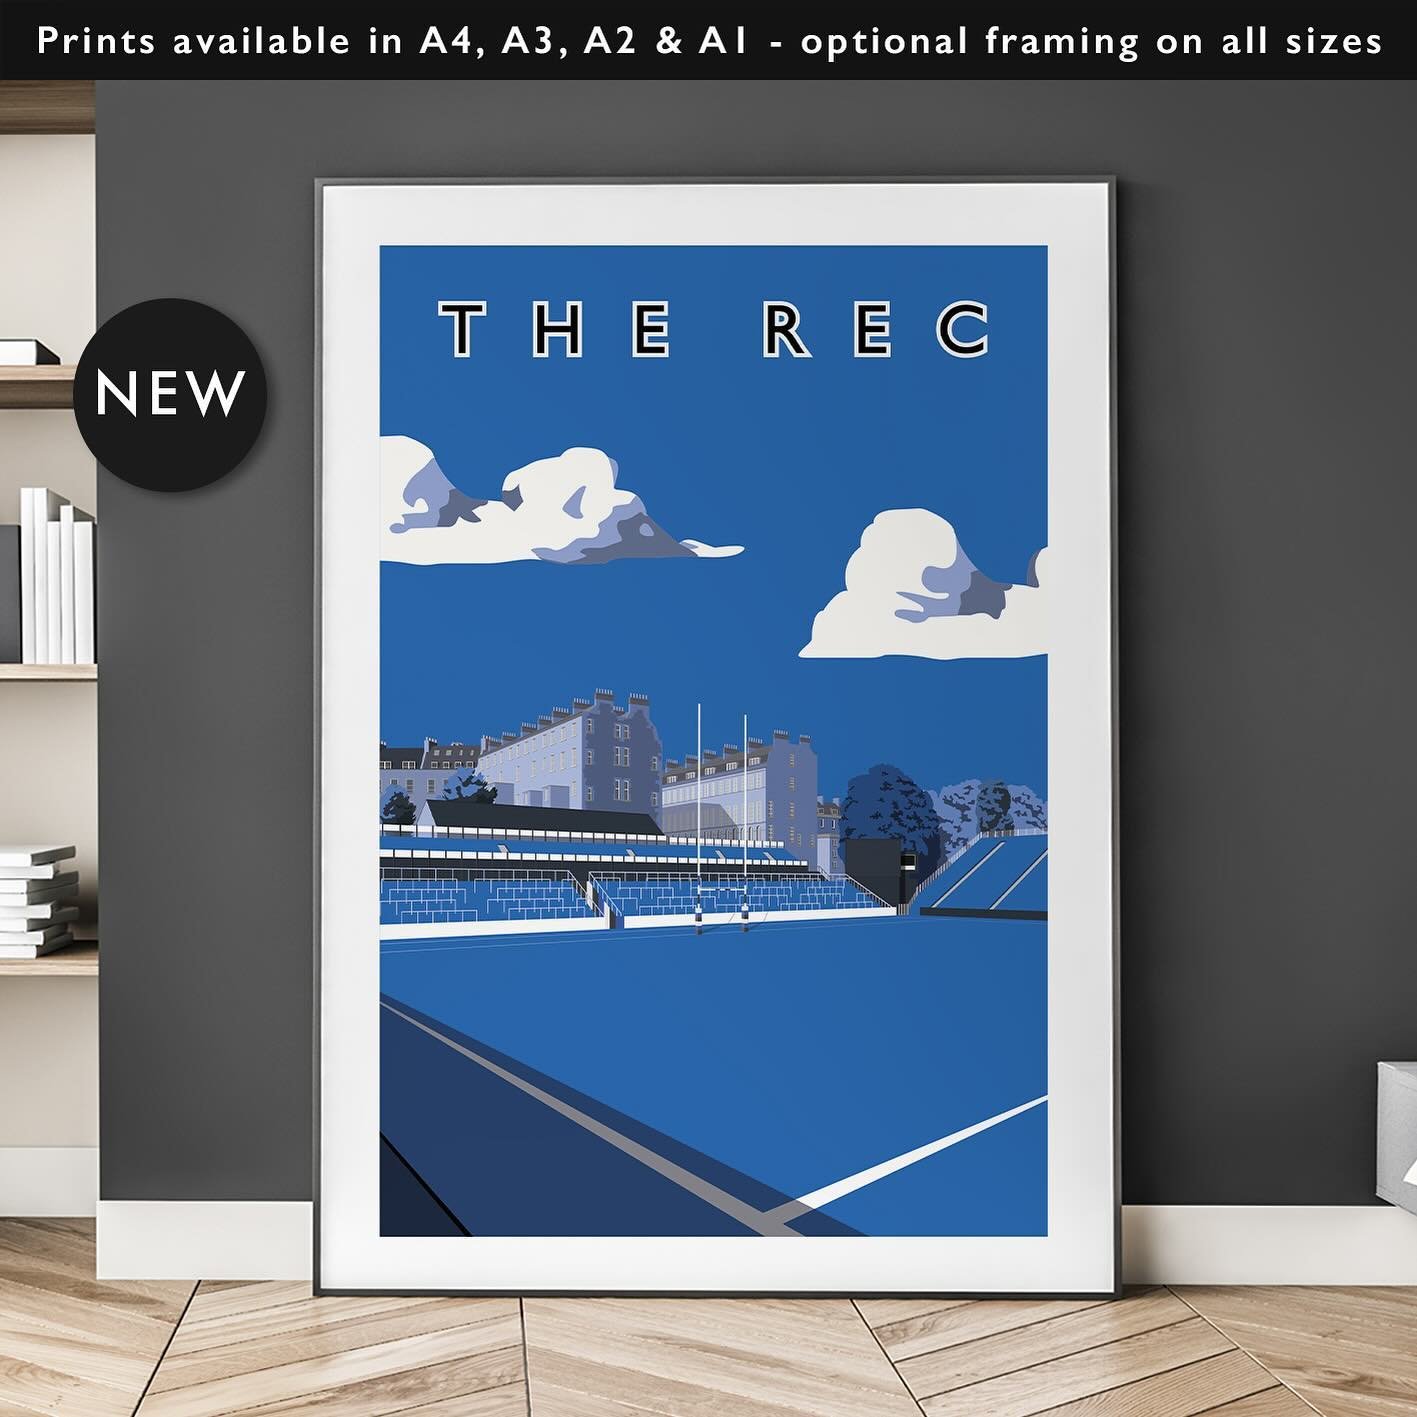 NEW: The Rec - Blue, Black &amp; Whites Edition

Get 10% off until midnight with the discount code:
THE-REC

Shop now: matthewjiwood.com/rugby/the-rec-&hellip;

Prints available in A4, A3, A2 &amp; A1 with optional framing

#Bath #RugbyBath #Rugby #T